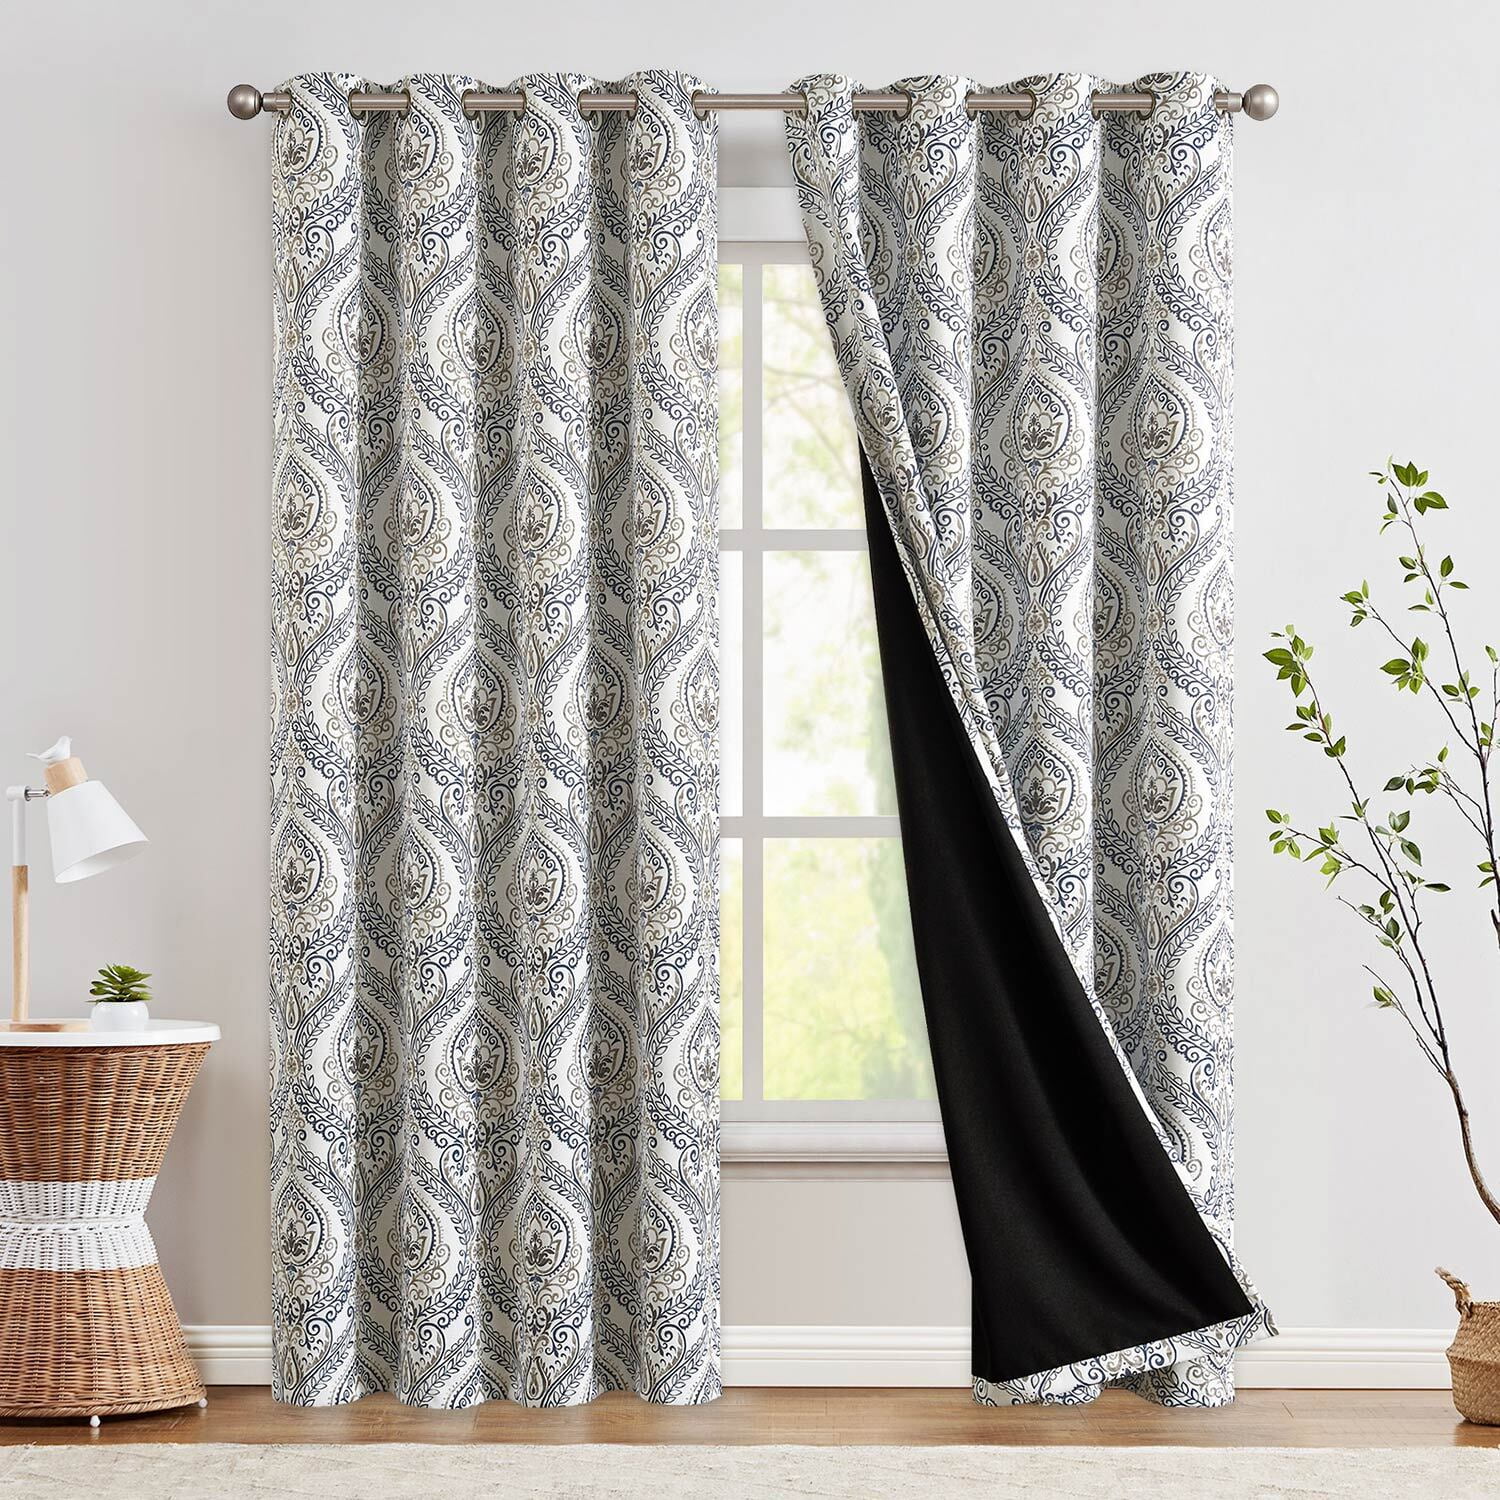 Curtainking 100% Blackout Curtains 96 in Taffy Damask Medallion Window  Curtains for Bedroom Grommet Thermal Insulated Drapes for Living Room  Vintage